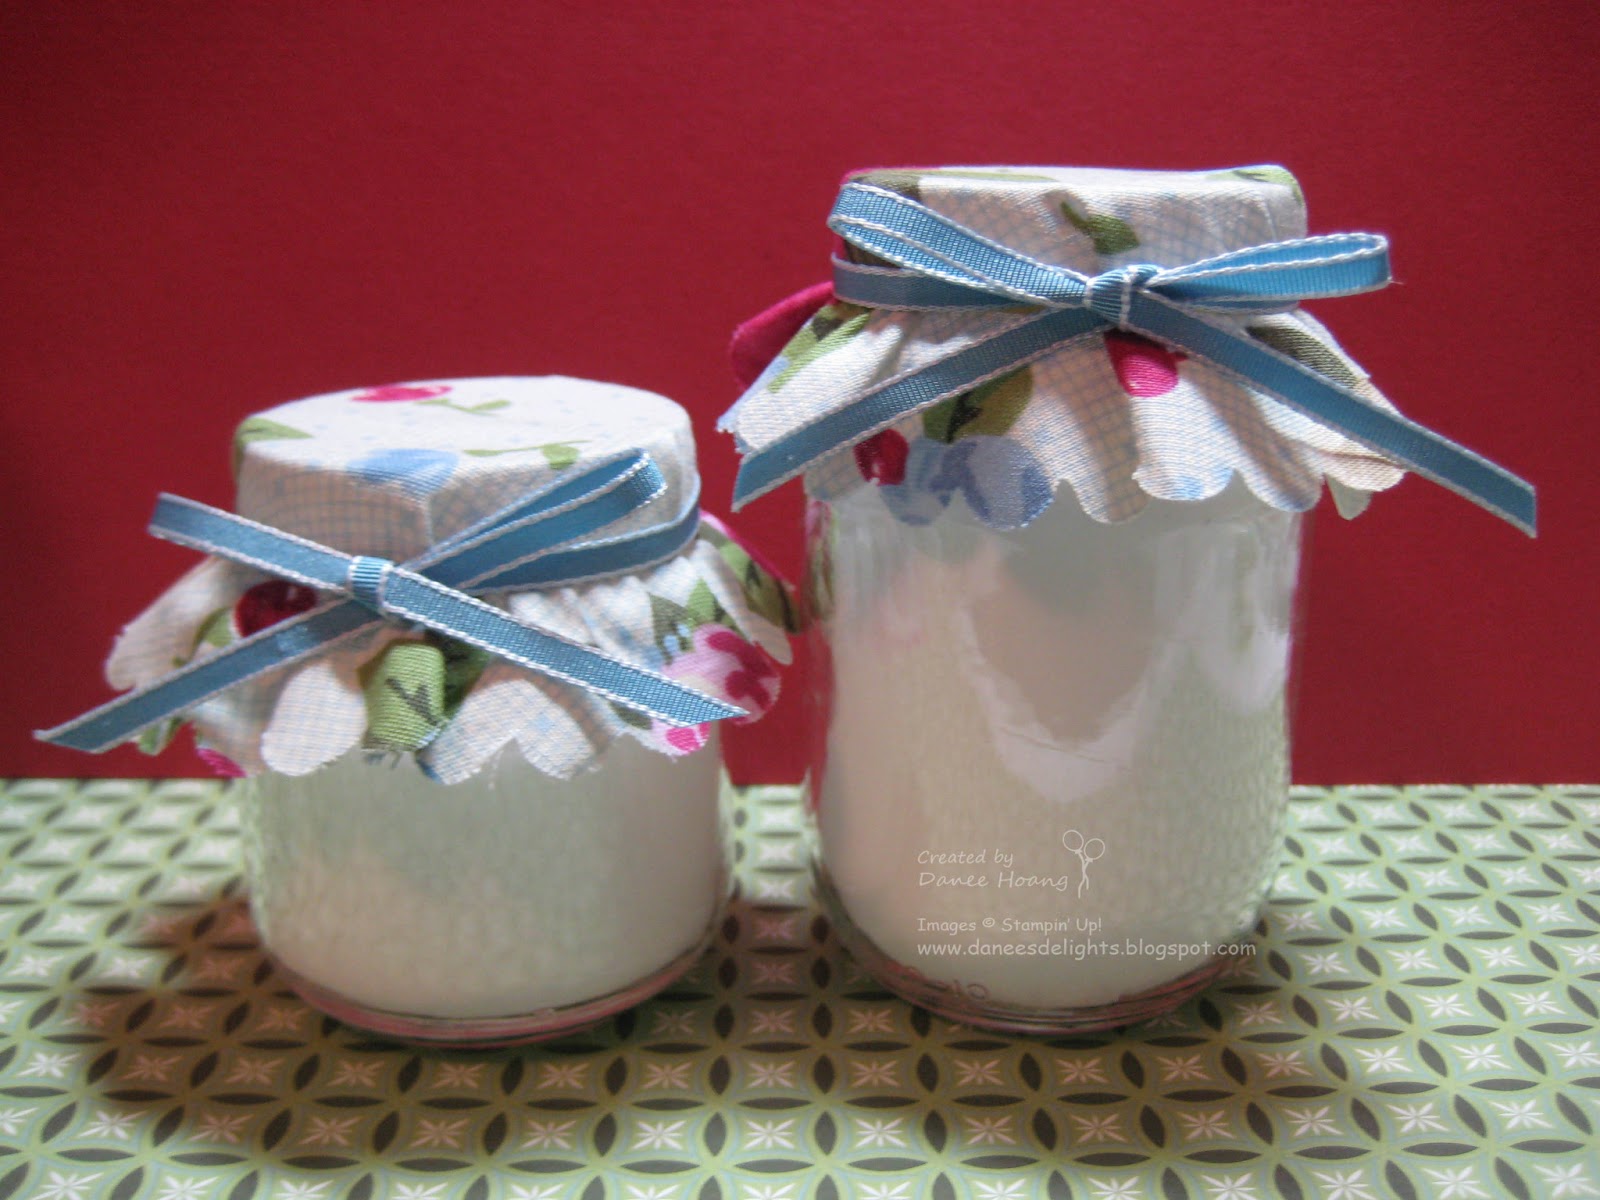 Danee's Stampin' Delights: Upcycled Baby Food Jars